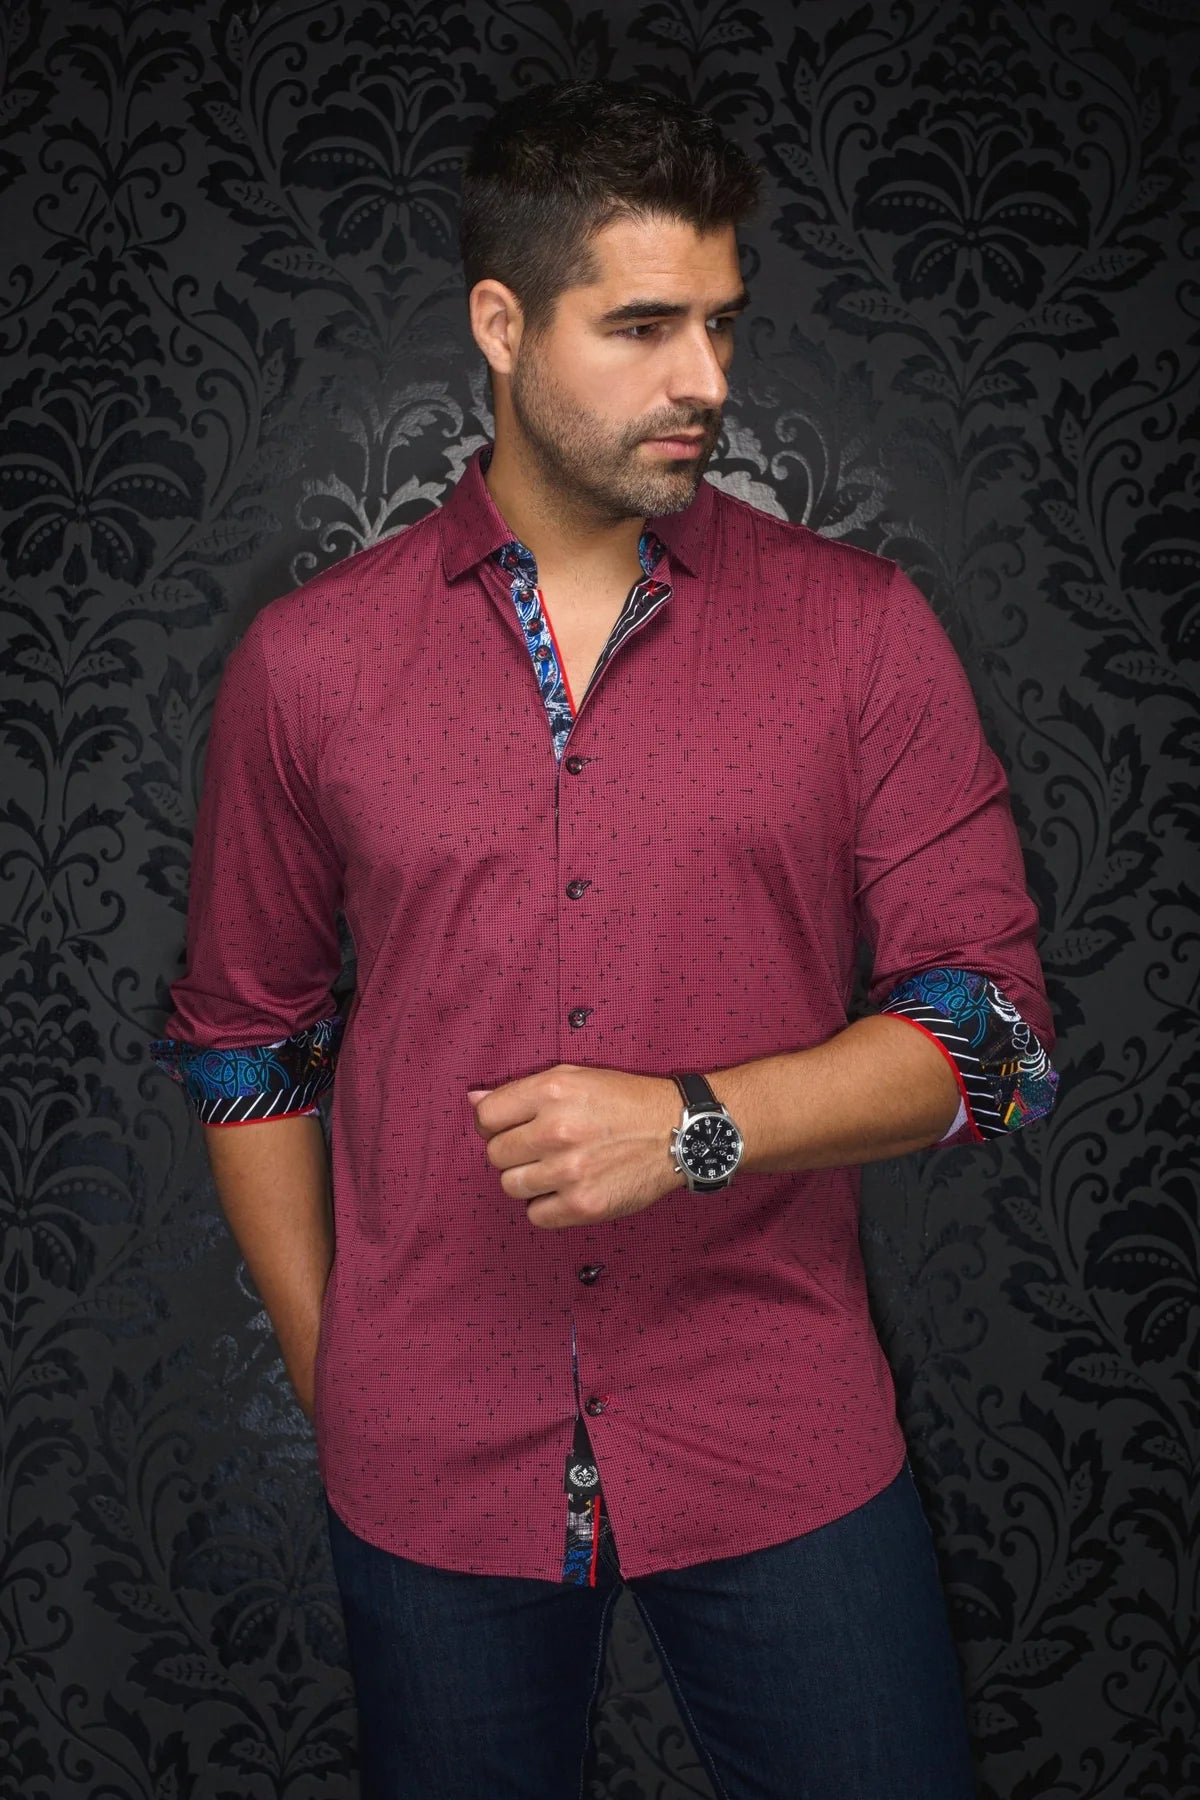 Men's casual dress shirt. Stand out with contrasting patterns and sophisticated details. Comfortable with high-end cotton fabric. 